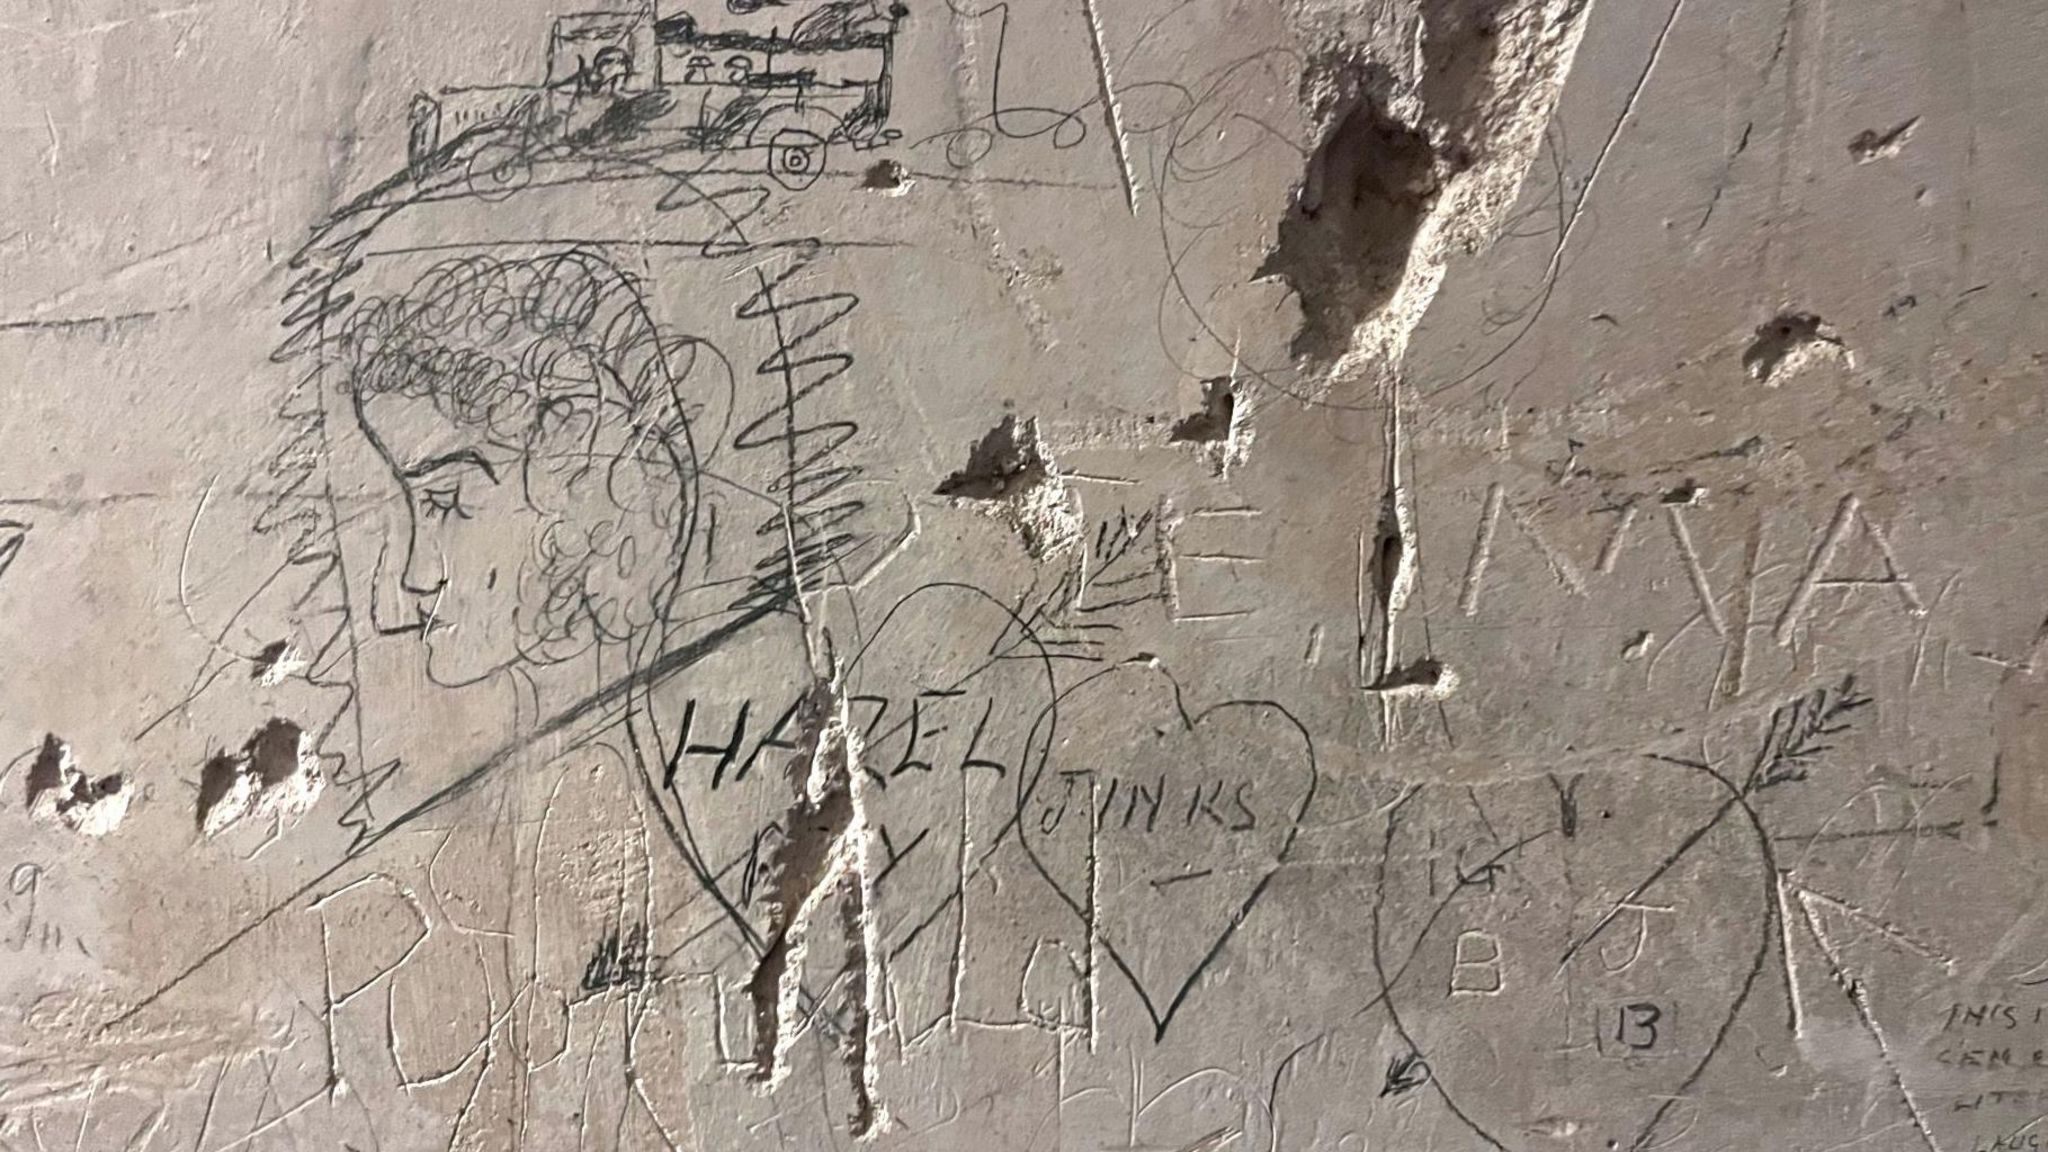 Some of the writing and drawings from the American soldiers that can be found on the walls of Killymoon Castle